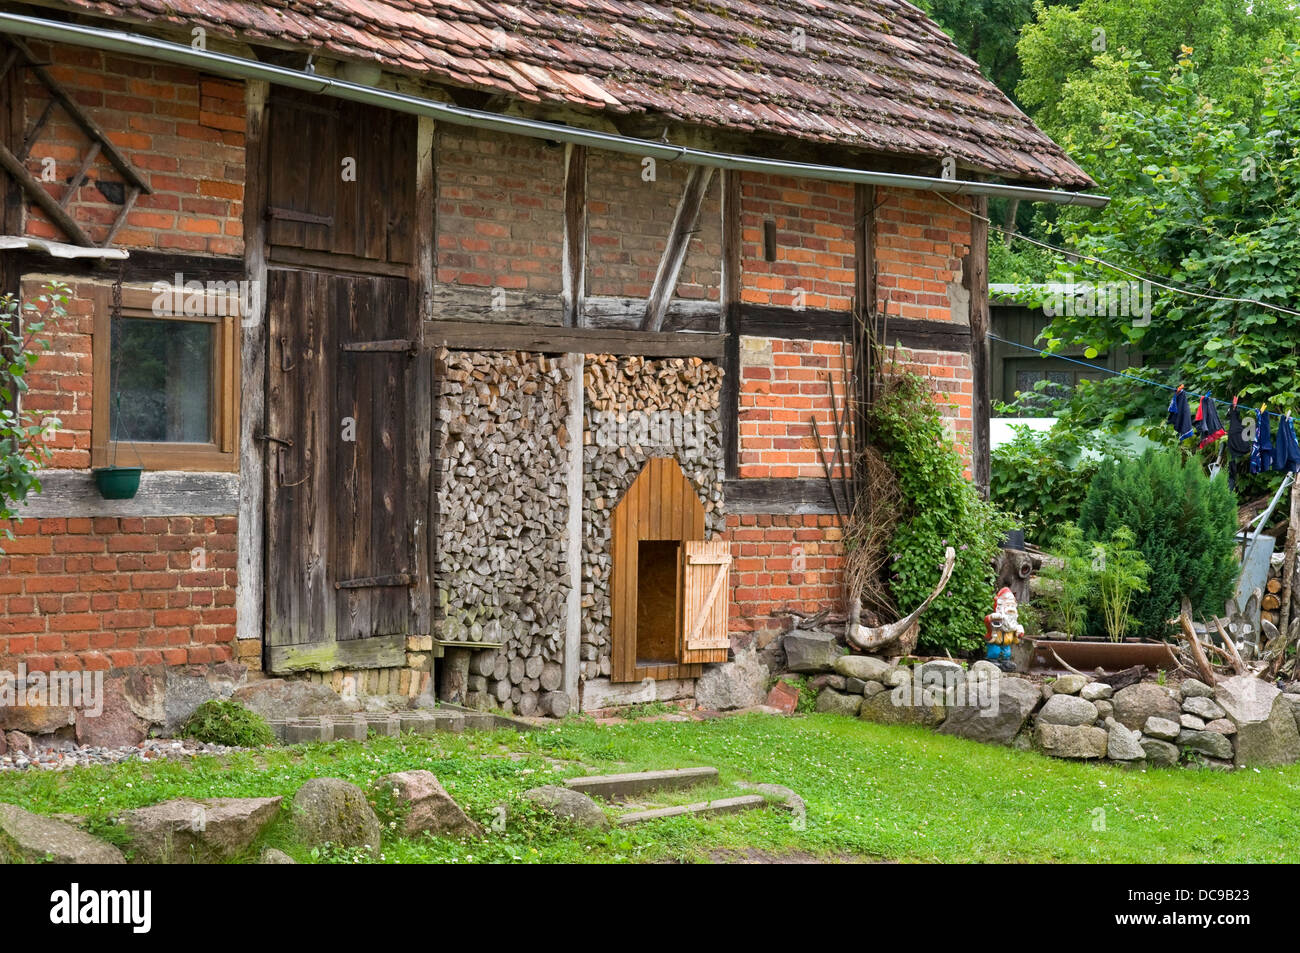 Rustic outbuildings in Mecklenburg, Germany Stock Photo